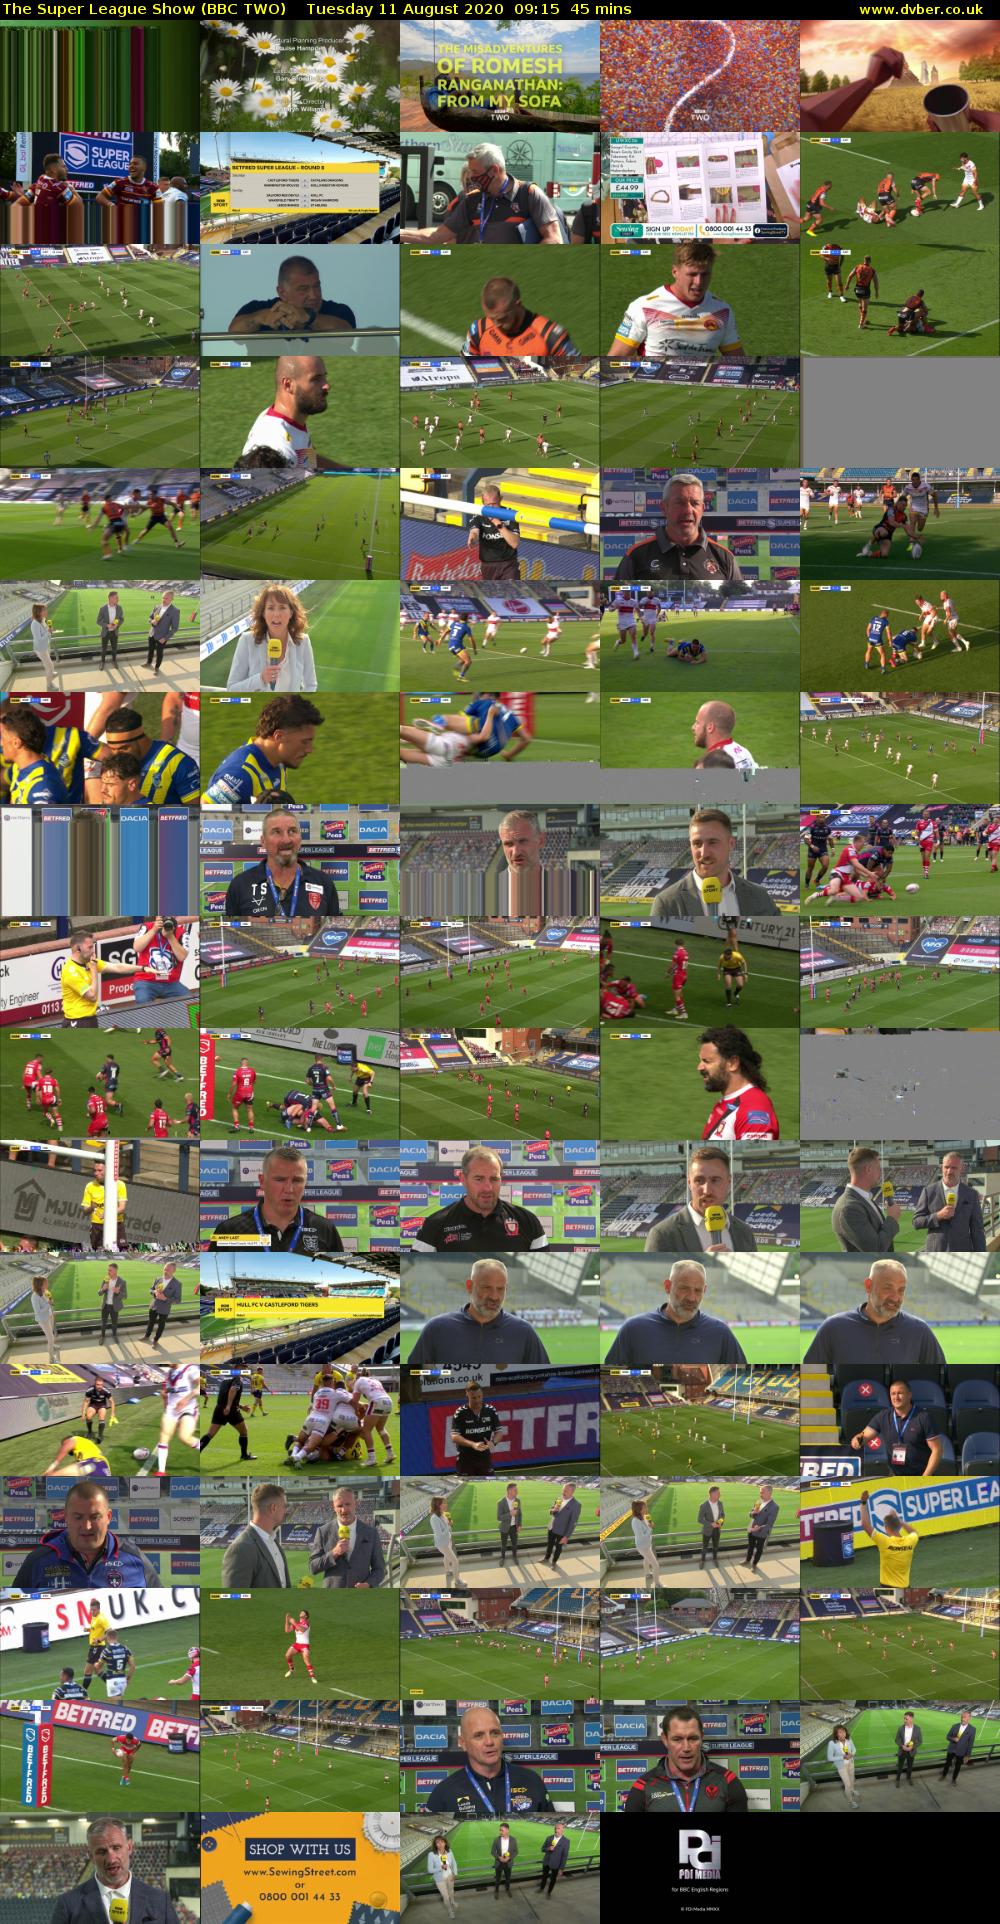 The Super League Show (BBC TWO) Tuesday 11 August 2020 09:15 - 10:00